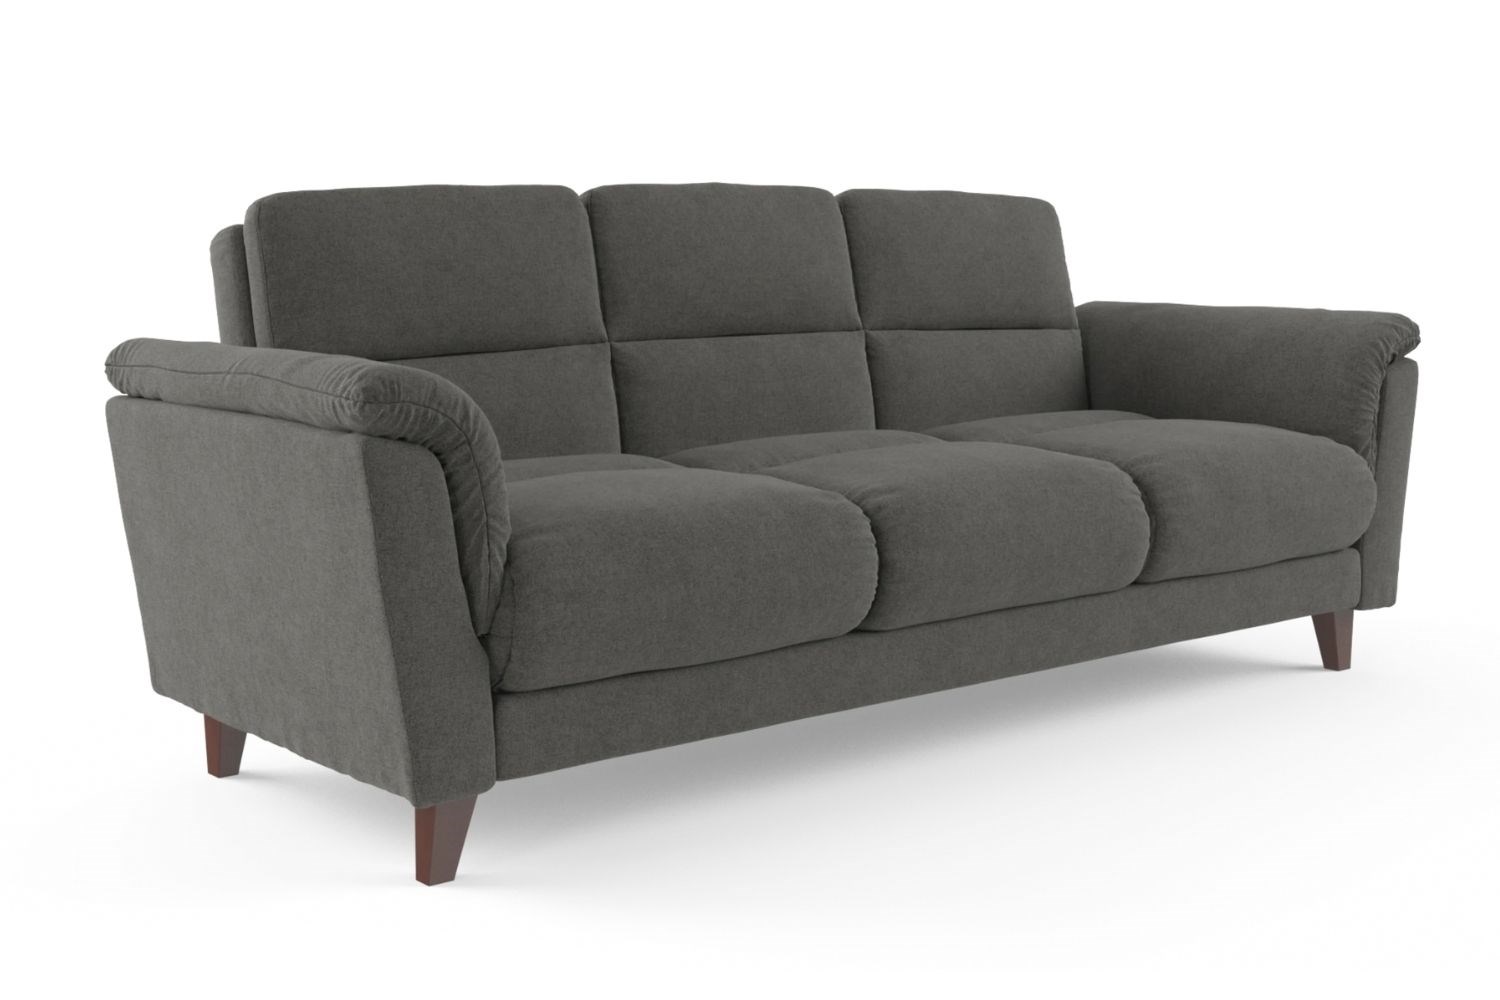 sofa beds on sale in brooklyn ny